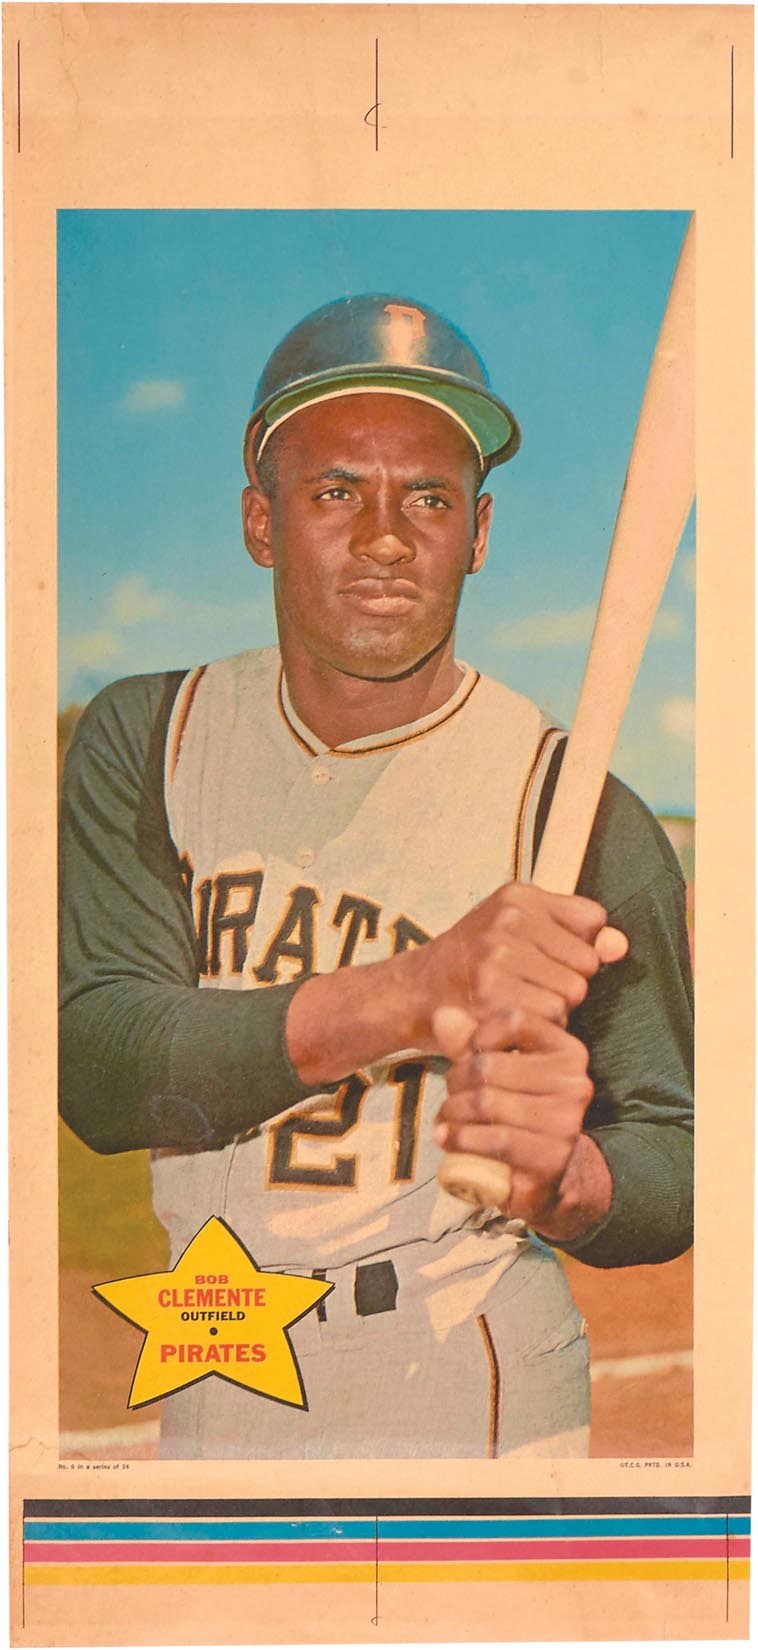 Baseball and Trading Cards - 1968 Roberto Clemente Topps Poster One-of a-Kind Proof